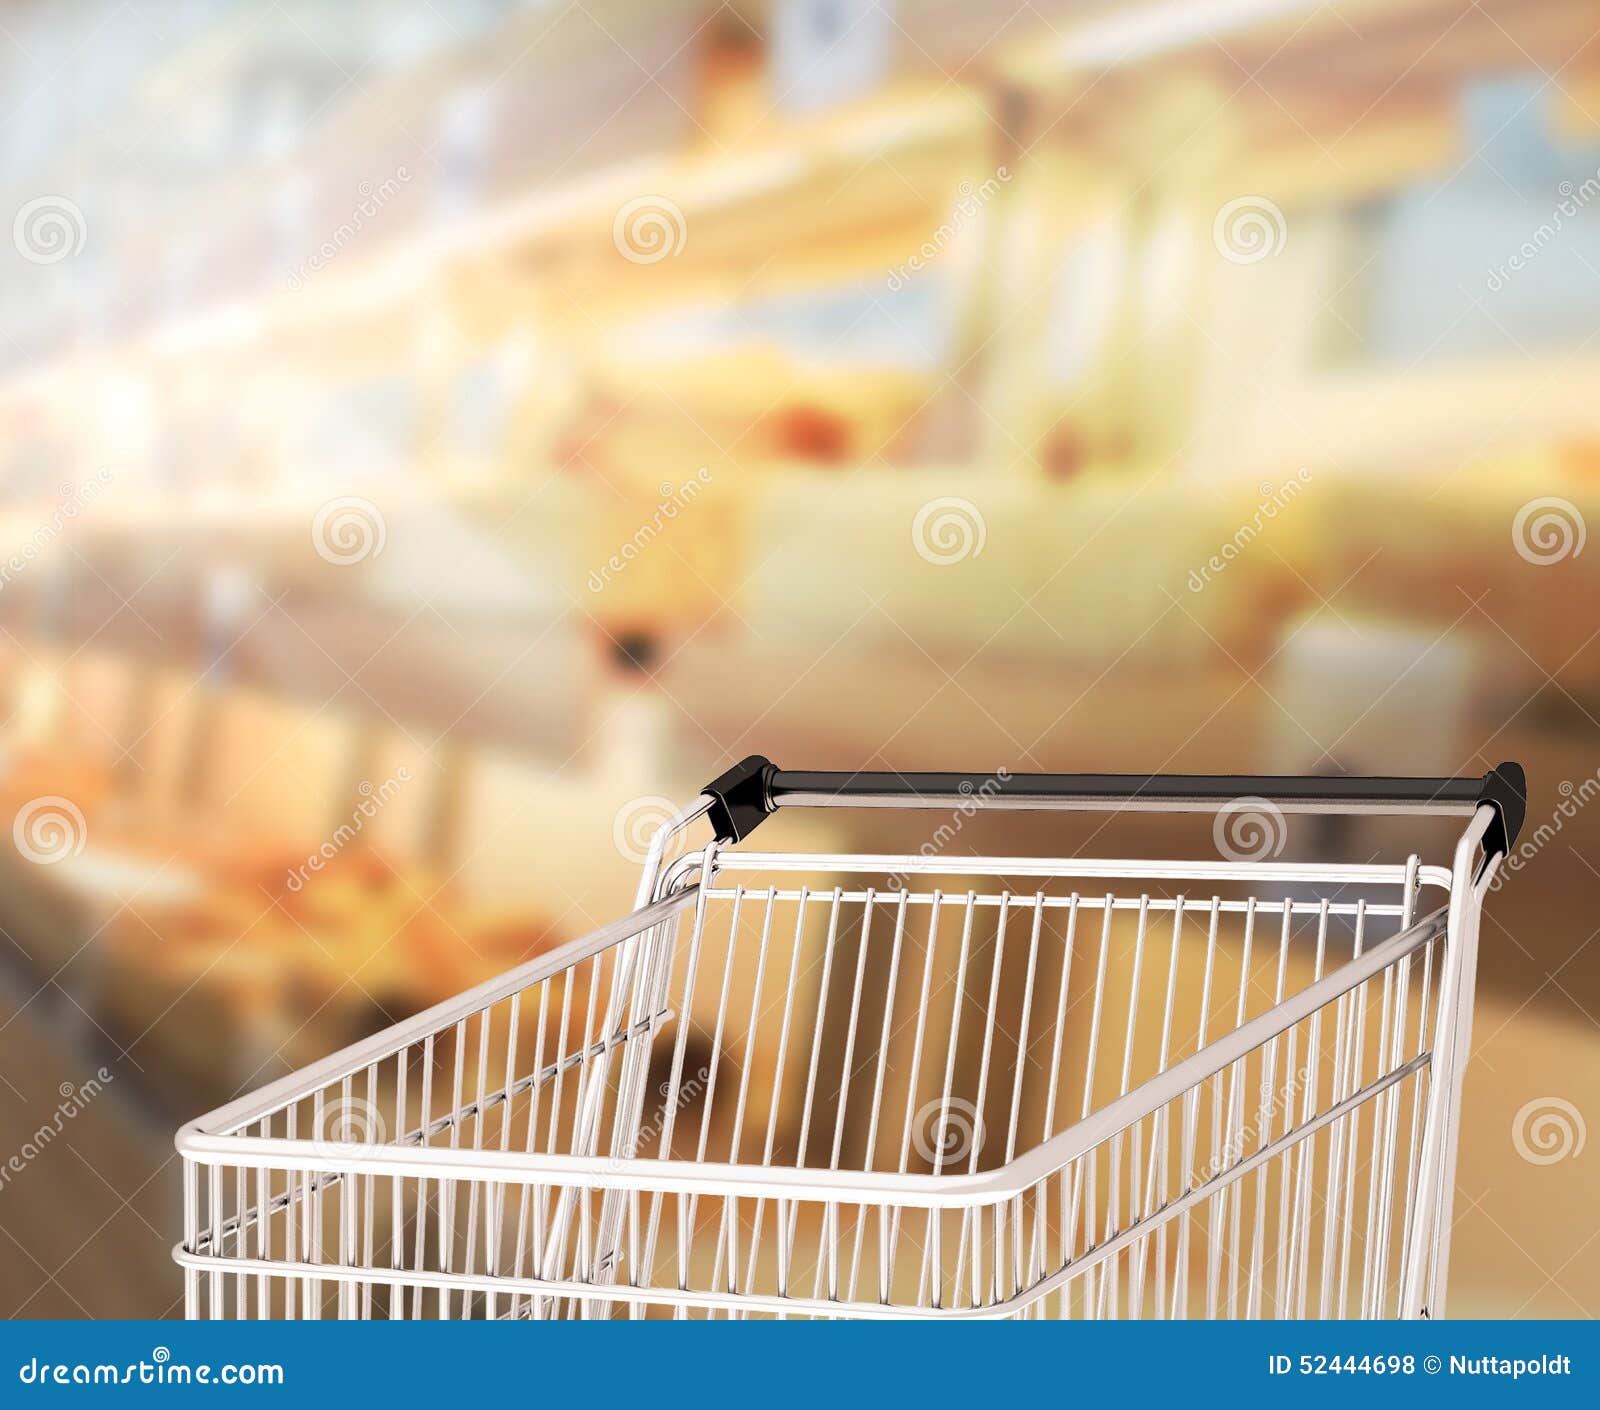 Abstract Blur Shopping Market Background Stock Photo - Image of group,  market: 52444698